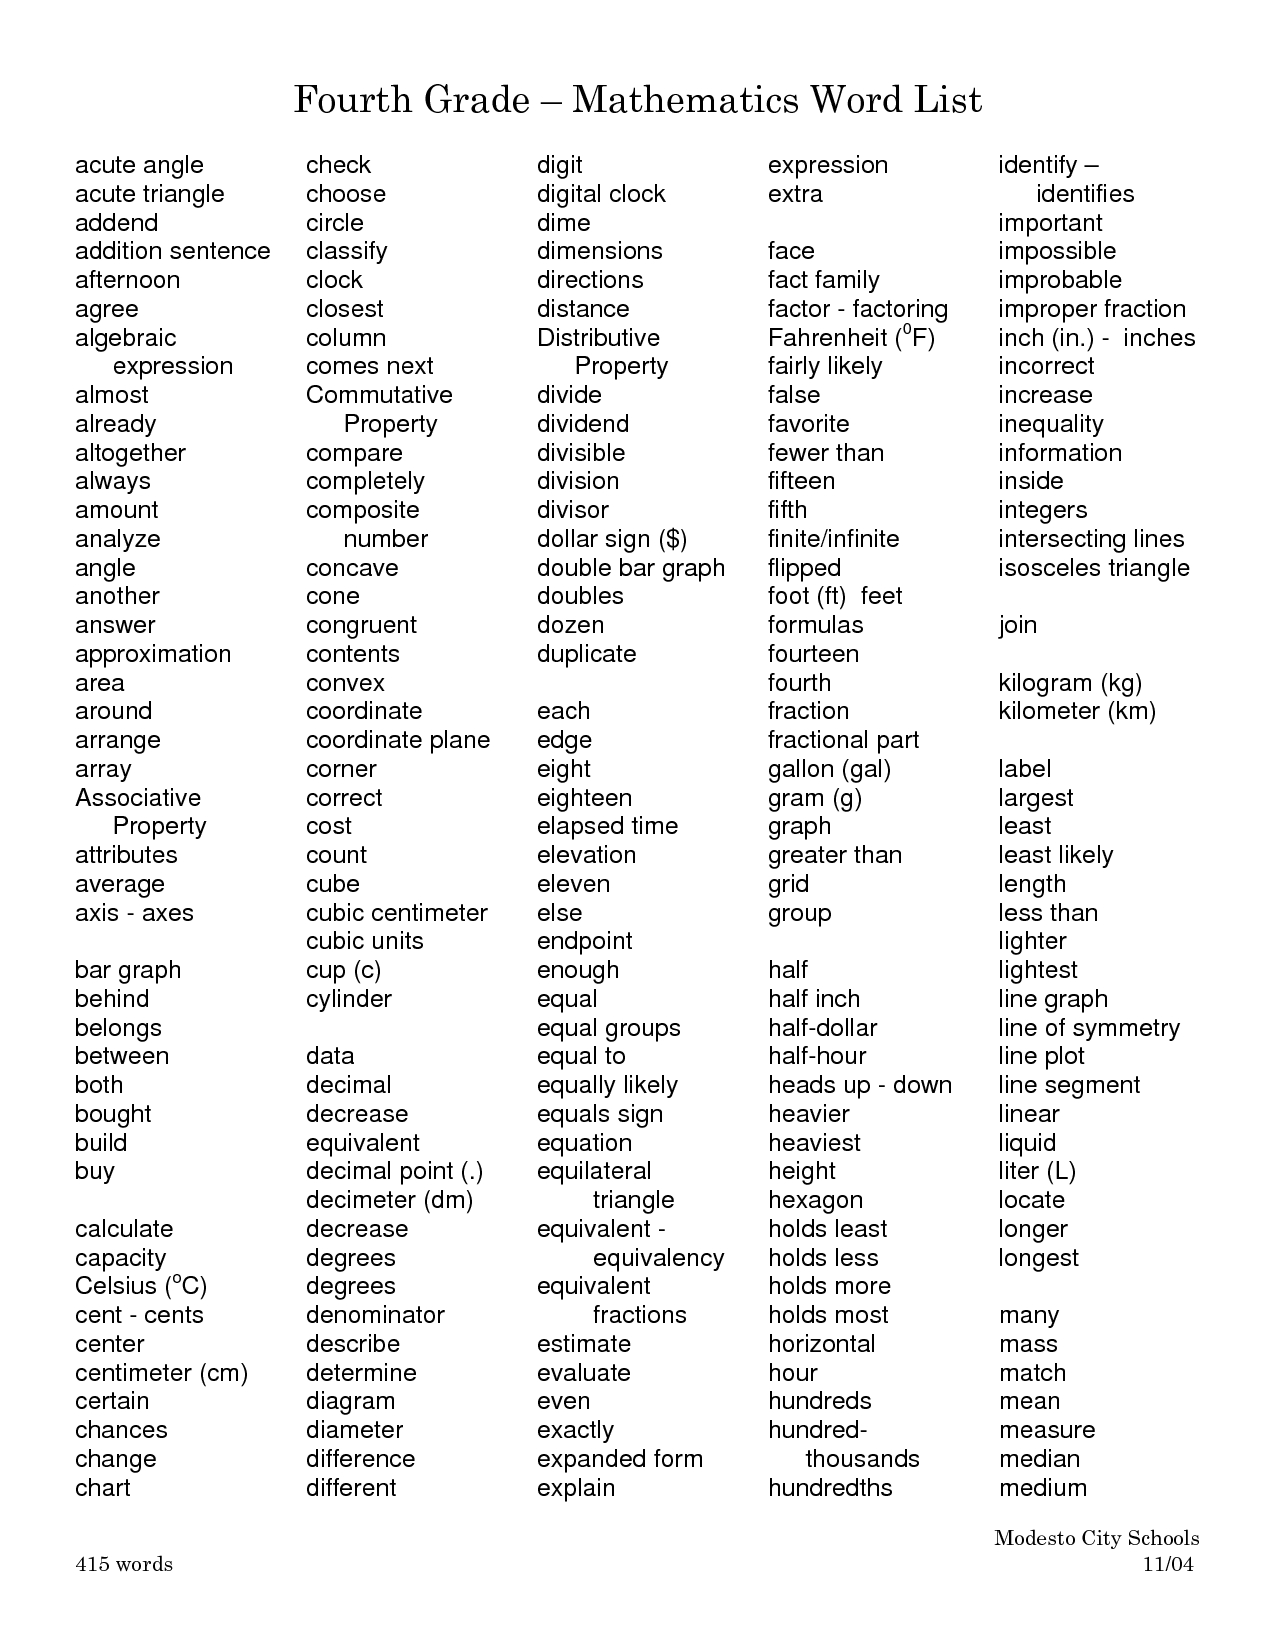 17-best-images-of-fourth-grade-words-printable-worksheets-third-grade-reading-sight-word-list